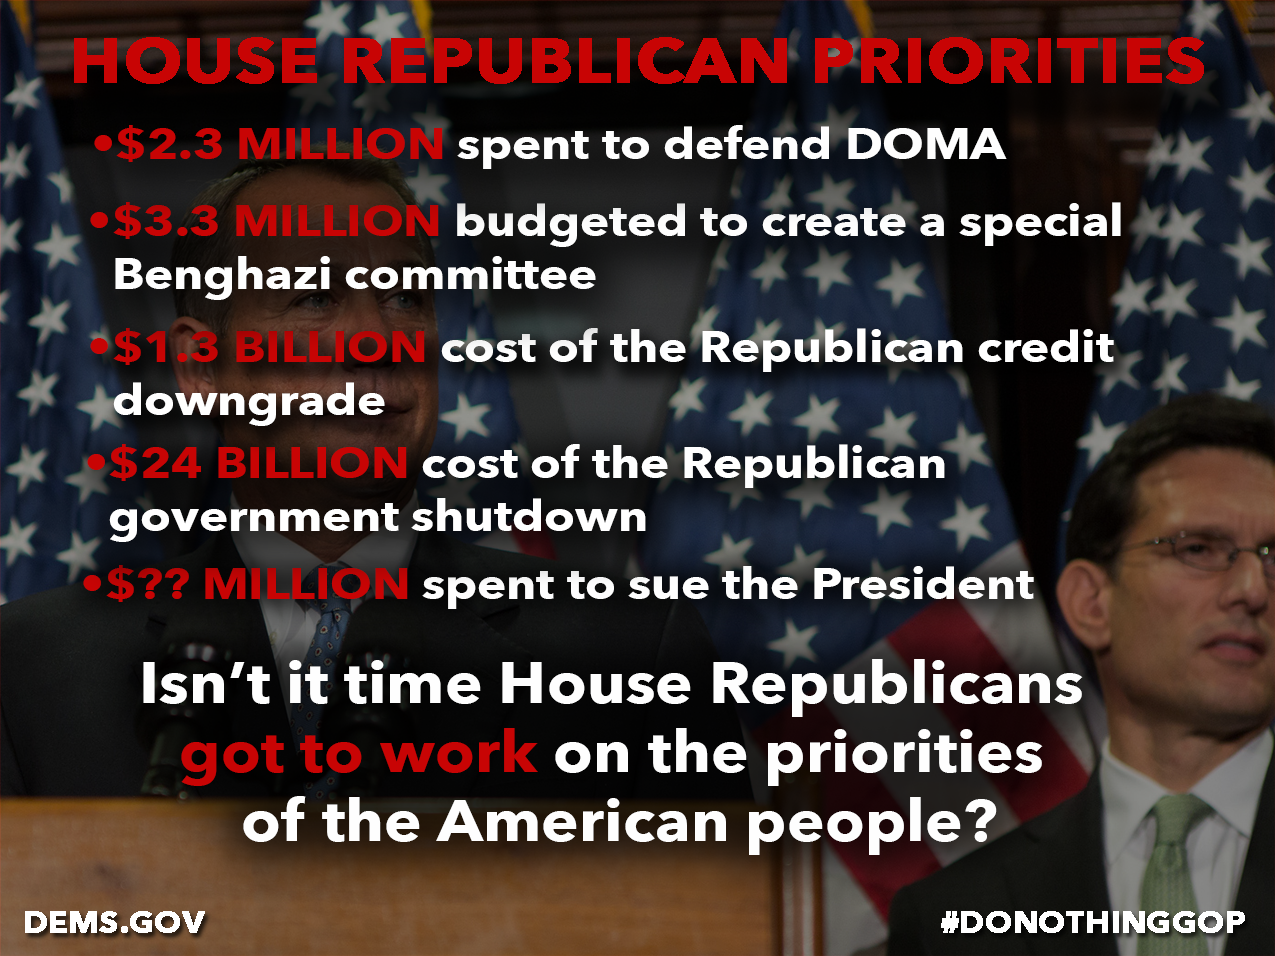 The priorities of the reckless House Republicans are clear. They are more focused on politics instead of funding our roads, putting forward a real jobs agenda and reforming our broken immigration system. It’s time to get to work.